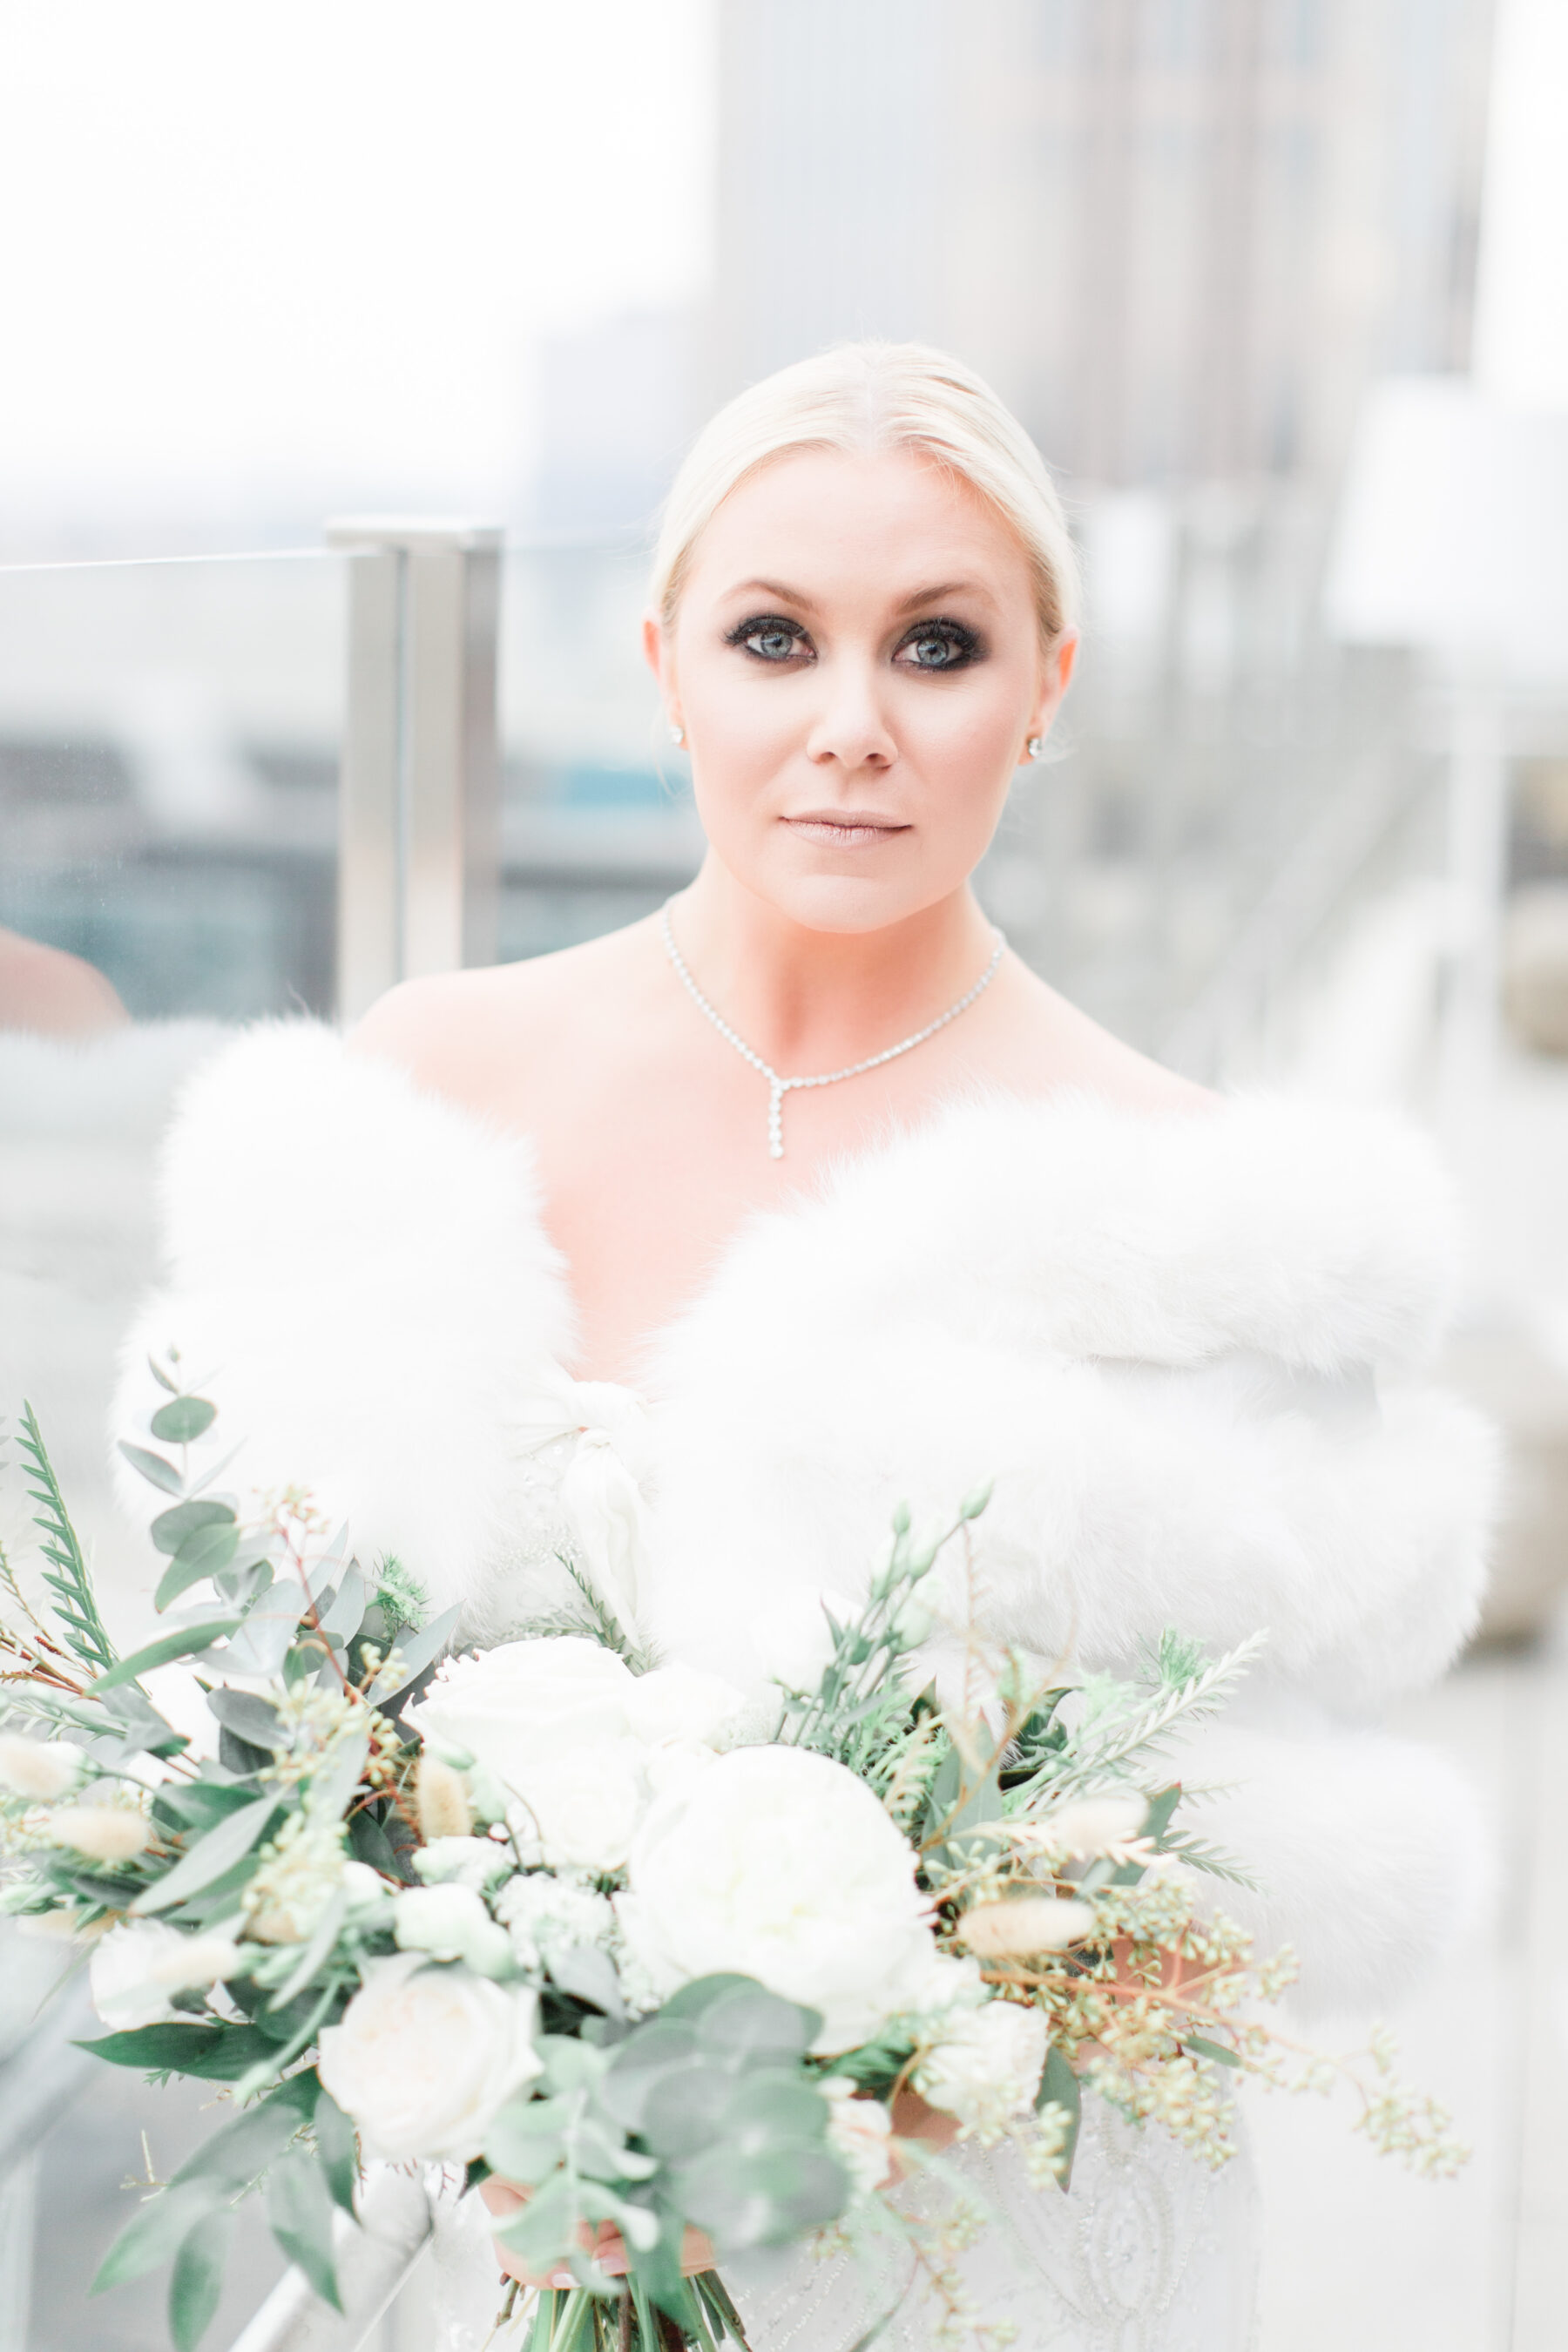 Winter bride wedding hair and makeup: Classic, Yet Modern New Years Eve Wedding Inspiration featured on Nashville Bride Guide